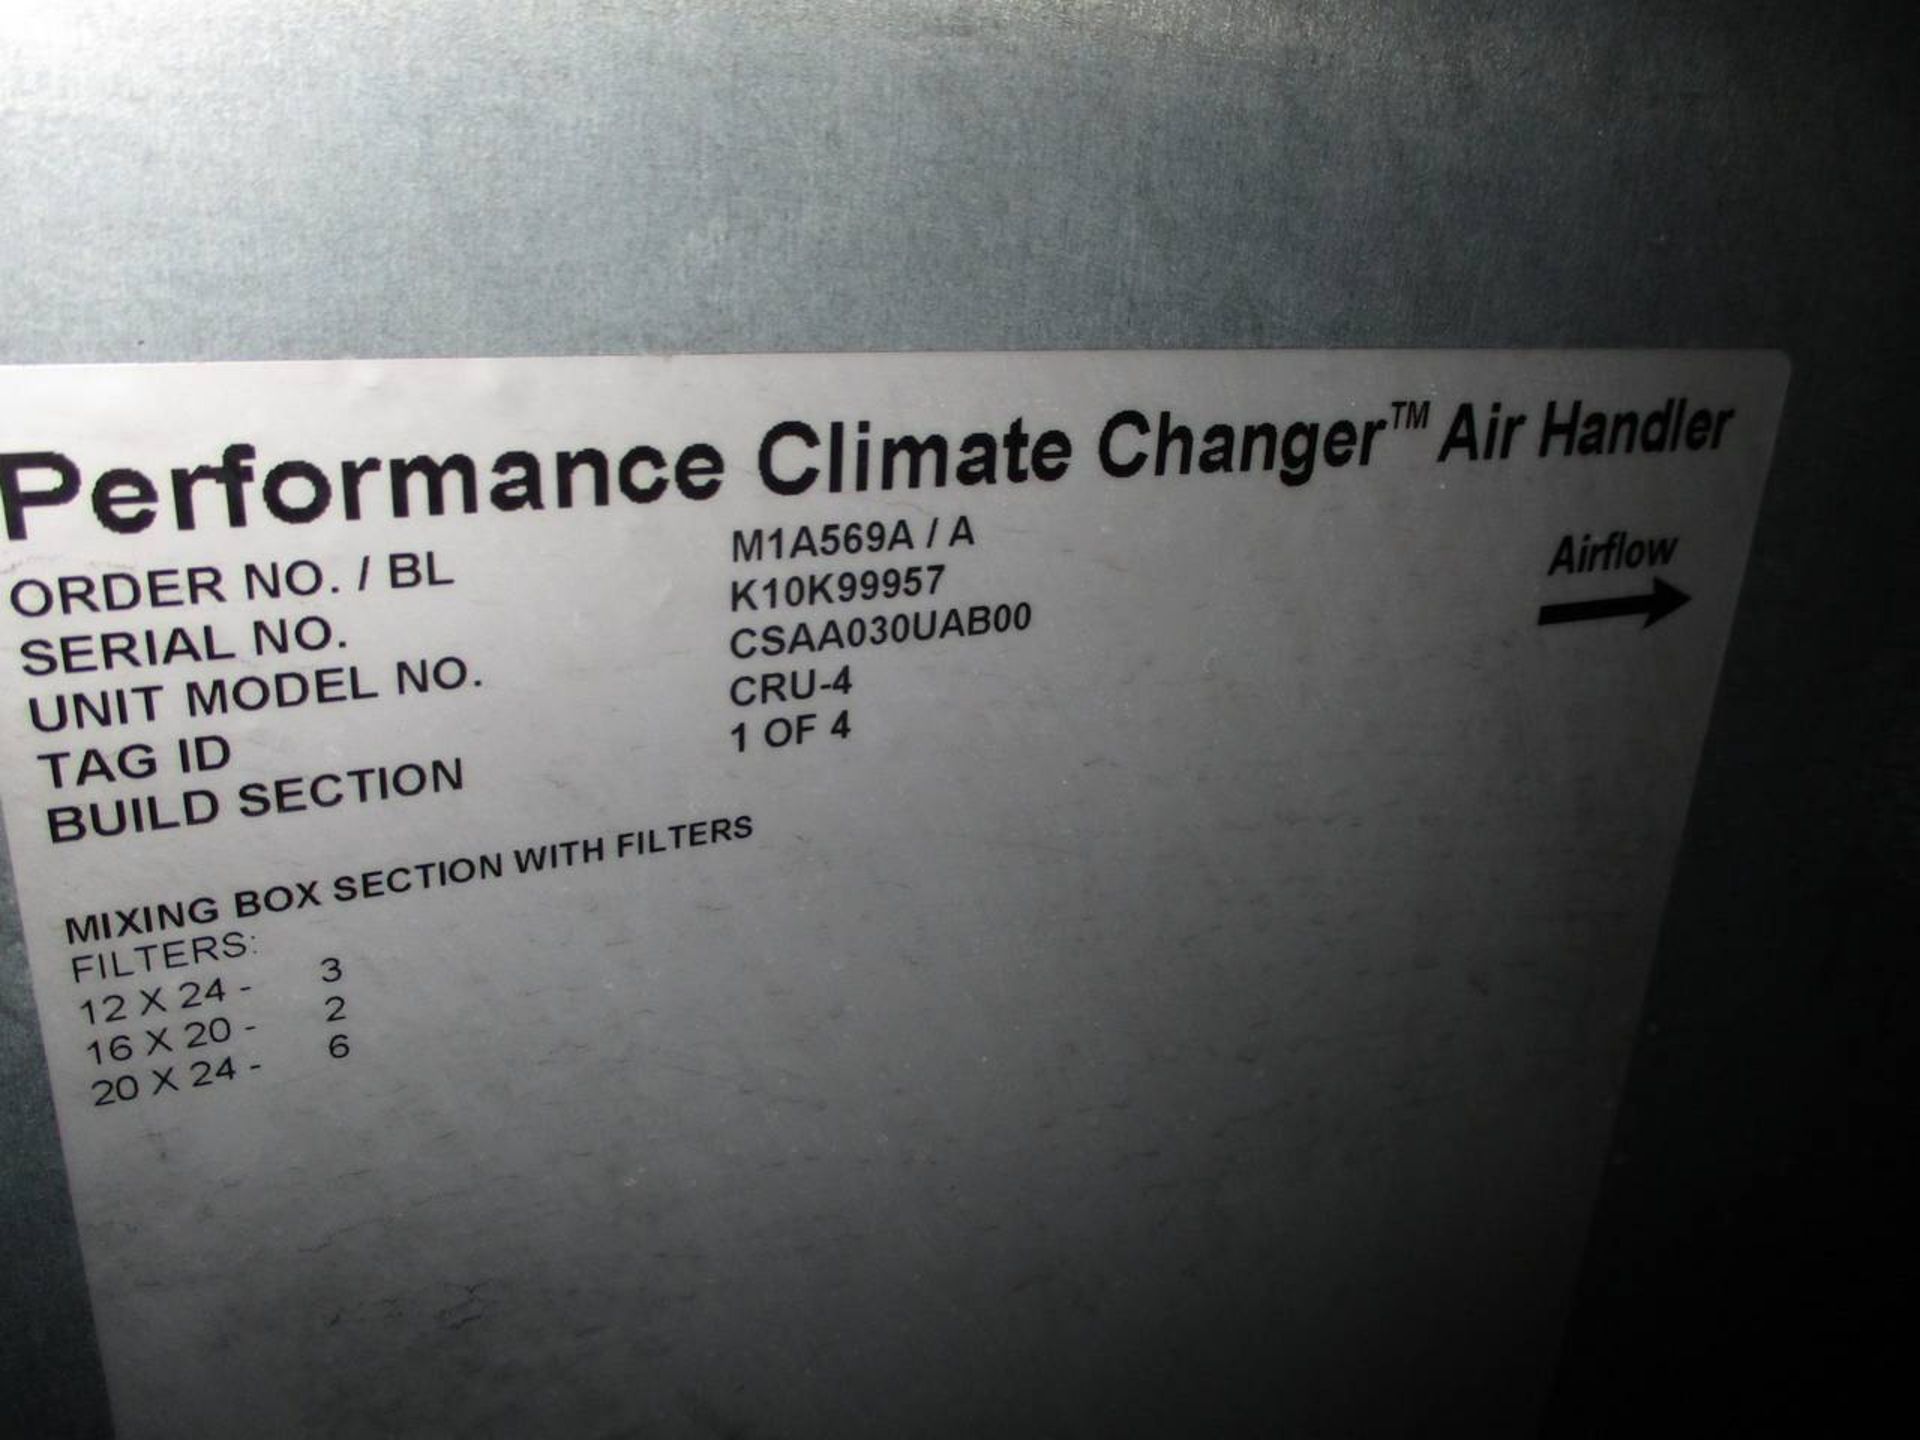 2010 Trane Performance Climate Changer Air Hander - Image 6 of 6